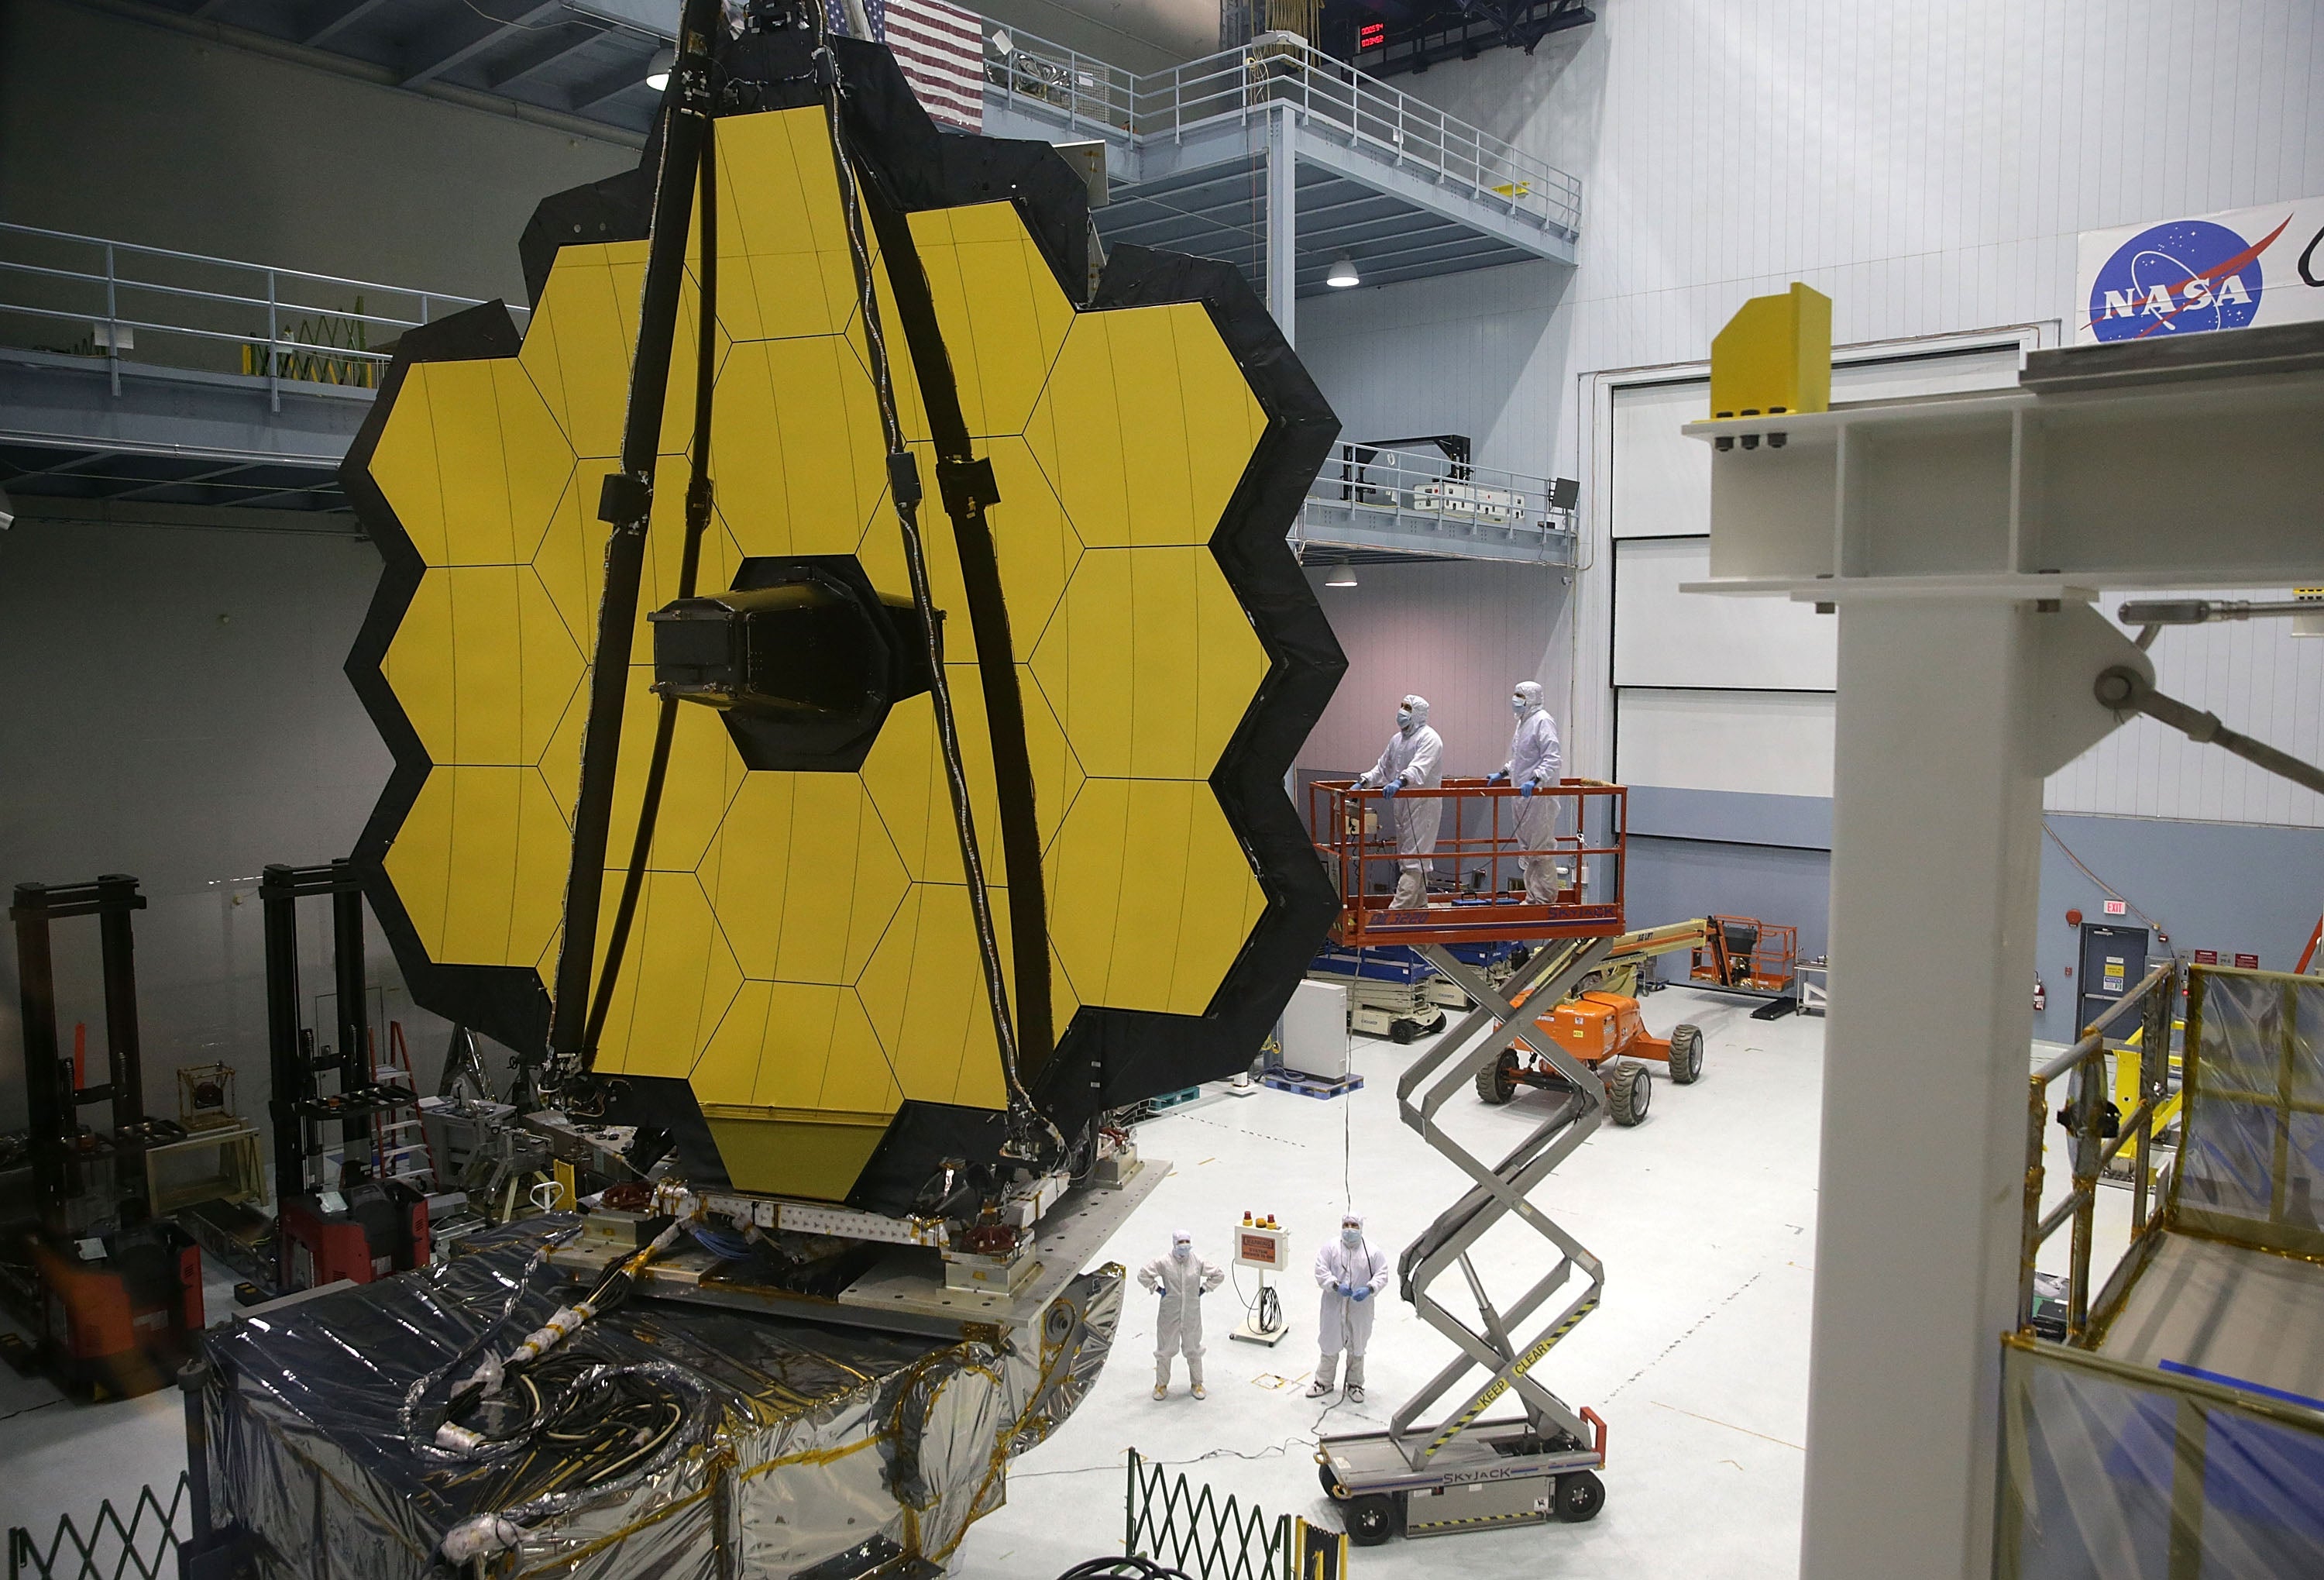 Engineers and technicians assemble the James Webb Space Telescope at Nasa's Goddard Space Flight Centre in Maryland